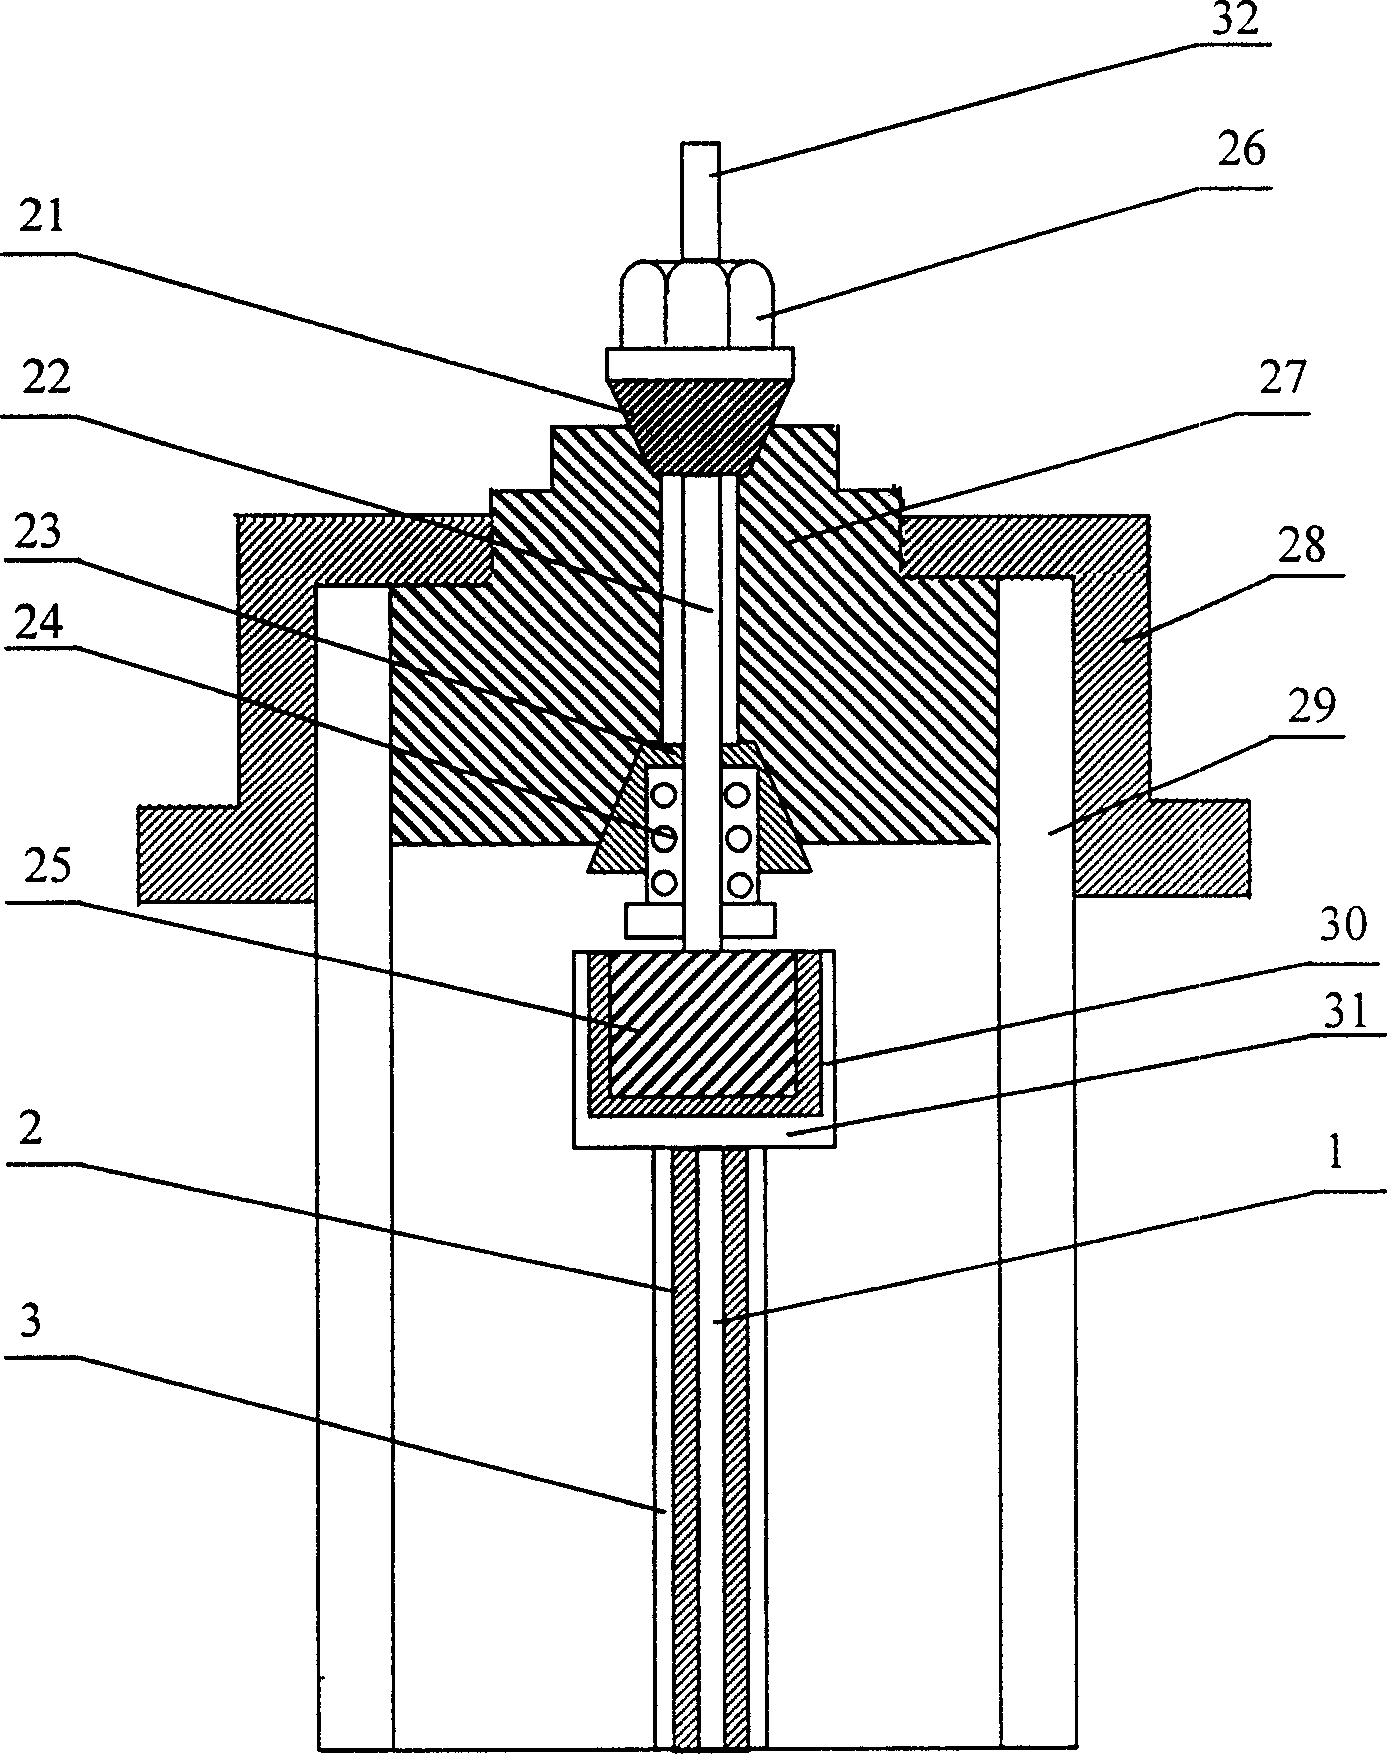 Dynamic high-temperature and pressure electro-chemical measurement experimental device